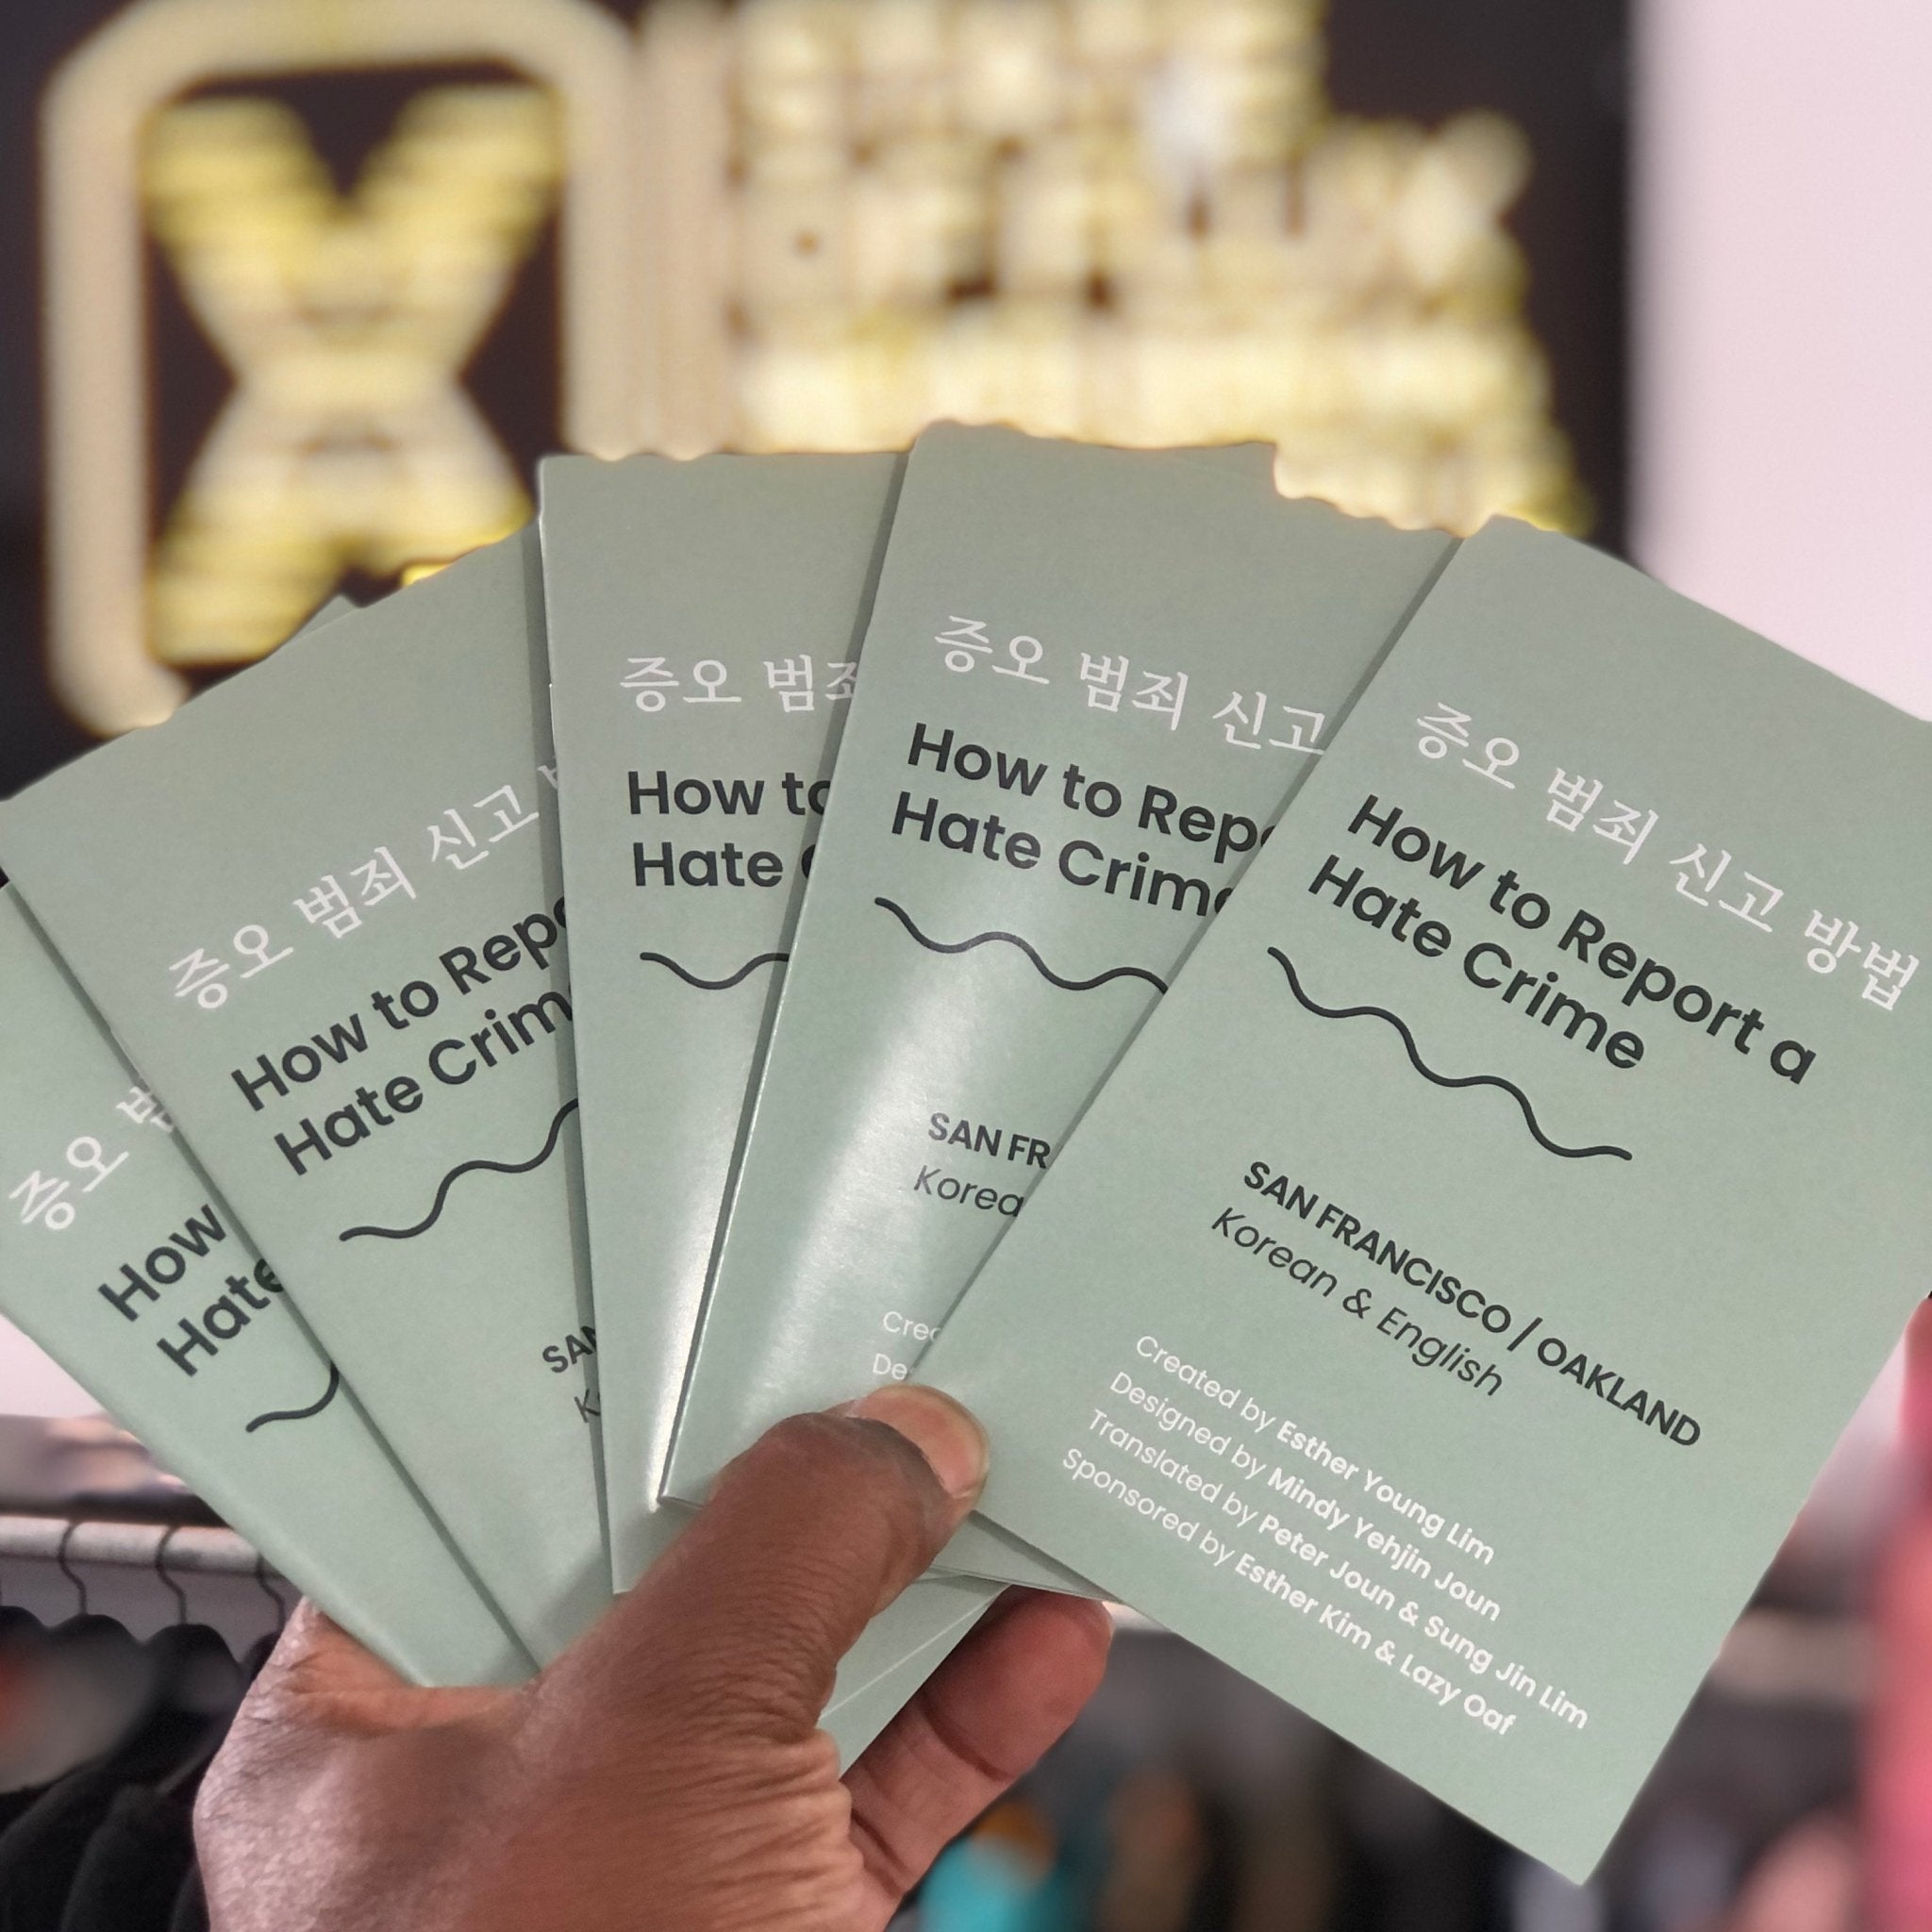 "How To Report A Hate Crime Booklet" Now Available at State Of Flux!